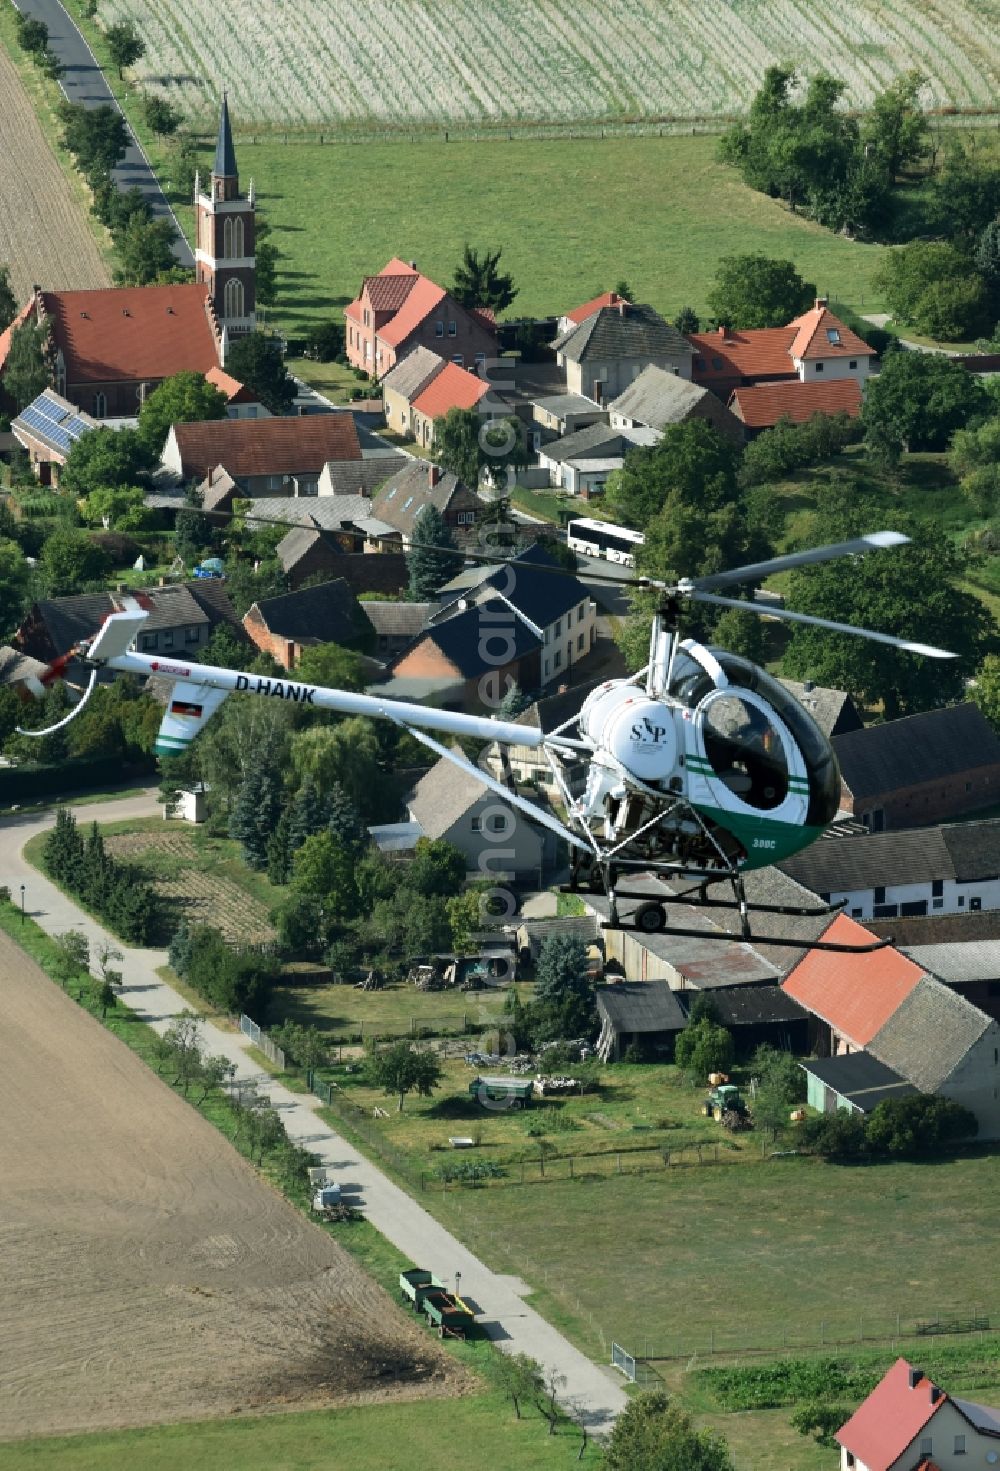 Aerial photograph Riesigk - Helicopter in flight Hughes 300 - Schweizer 300C call sign D-HANK over the air space in Riesigk in the state Saxony-Anhalt